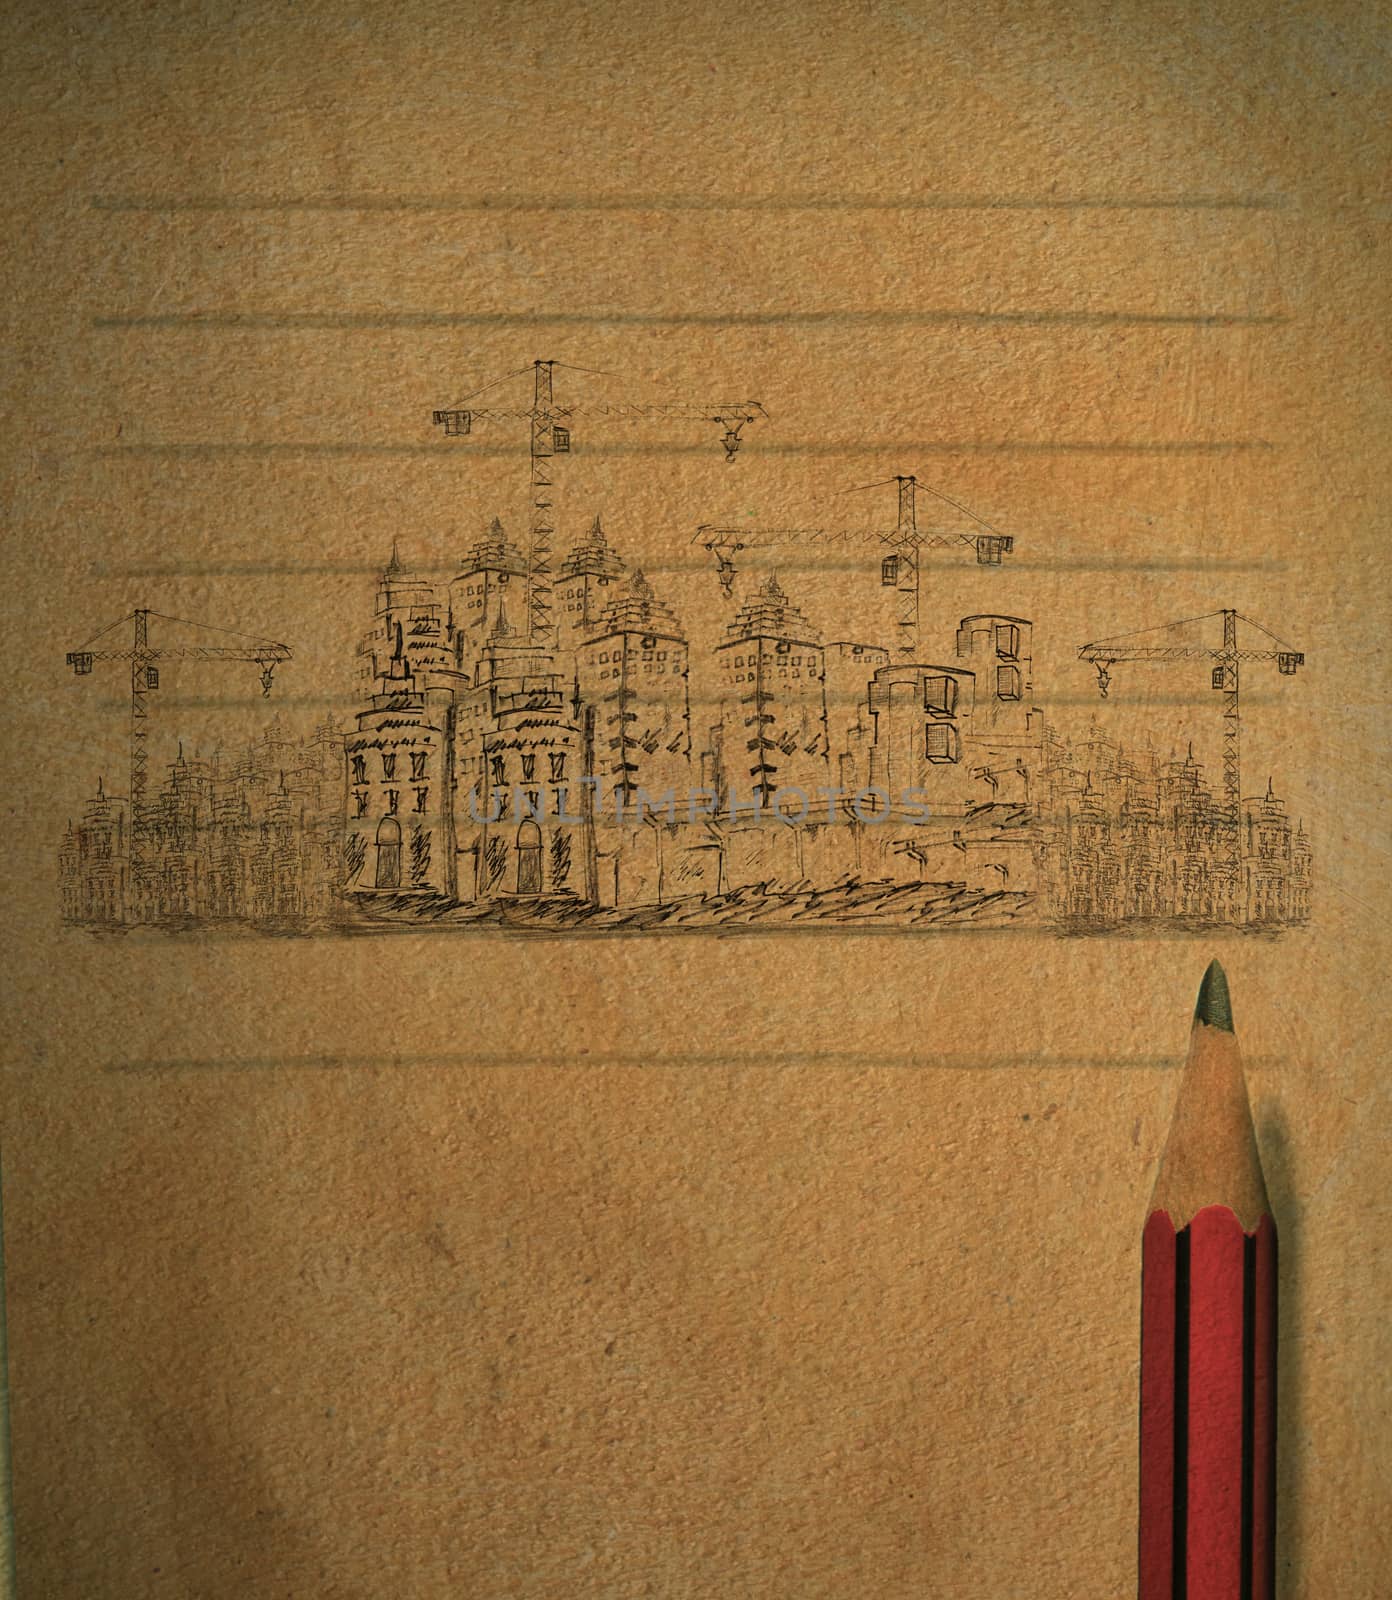 sketching idea for building construction on note book for construction business theme